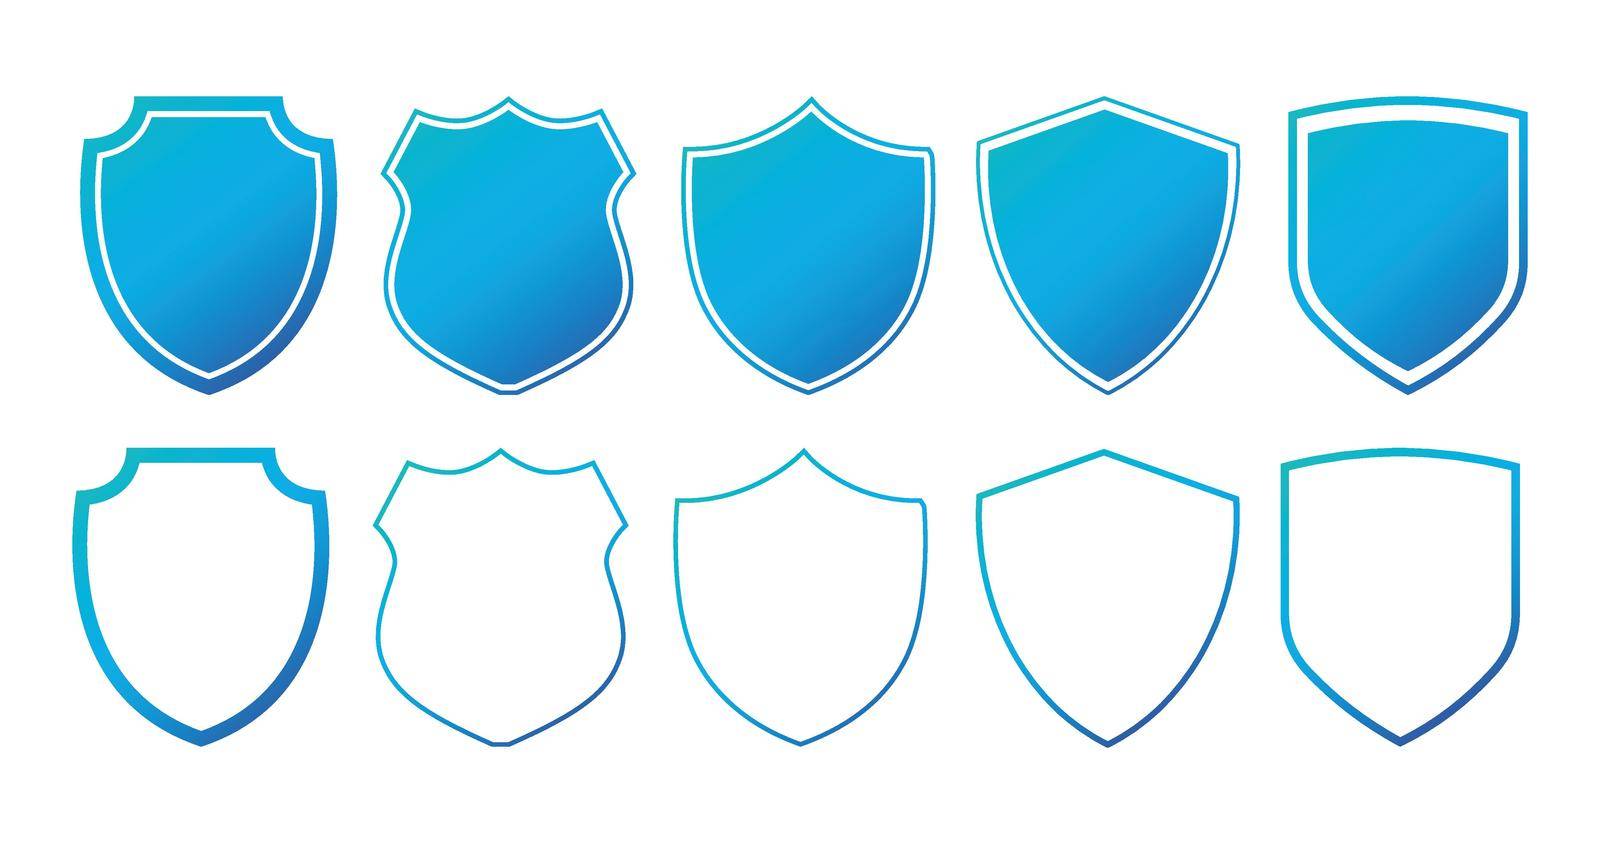 set of flat blue shields with contours. Vector illustration isolated on white